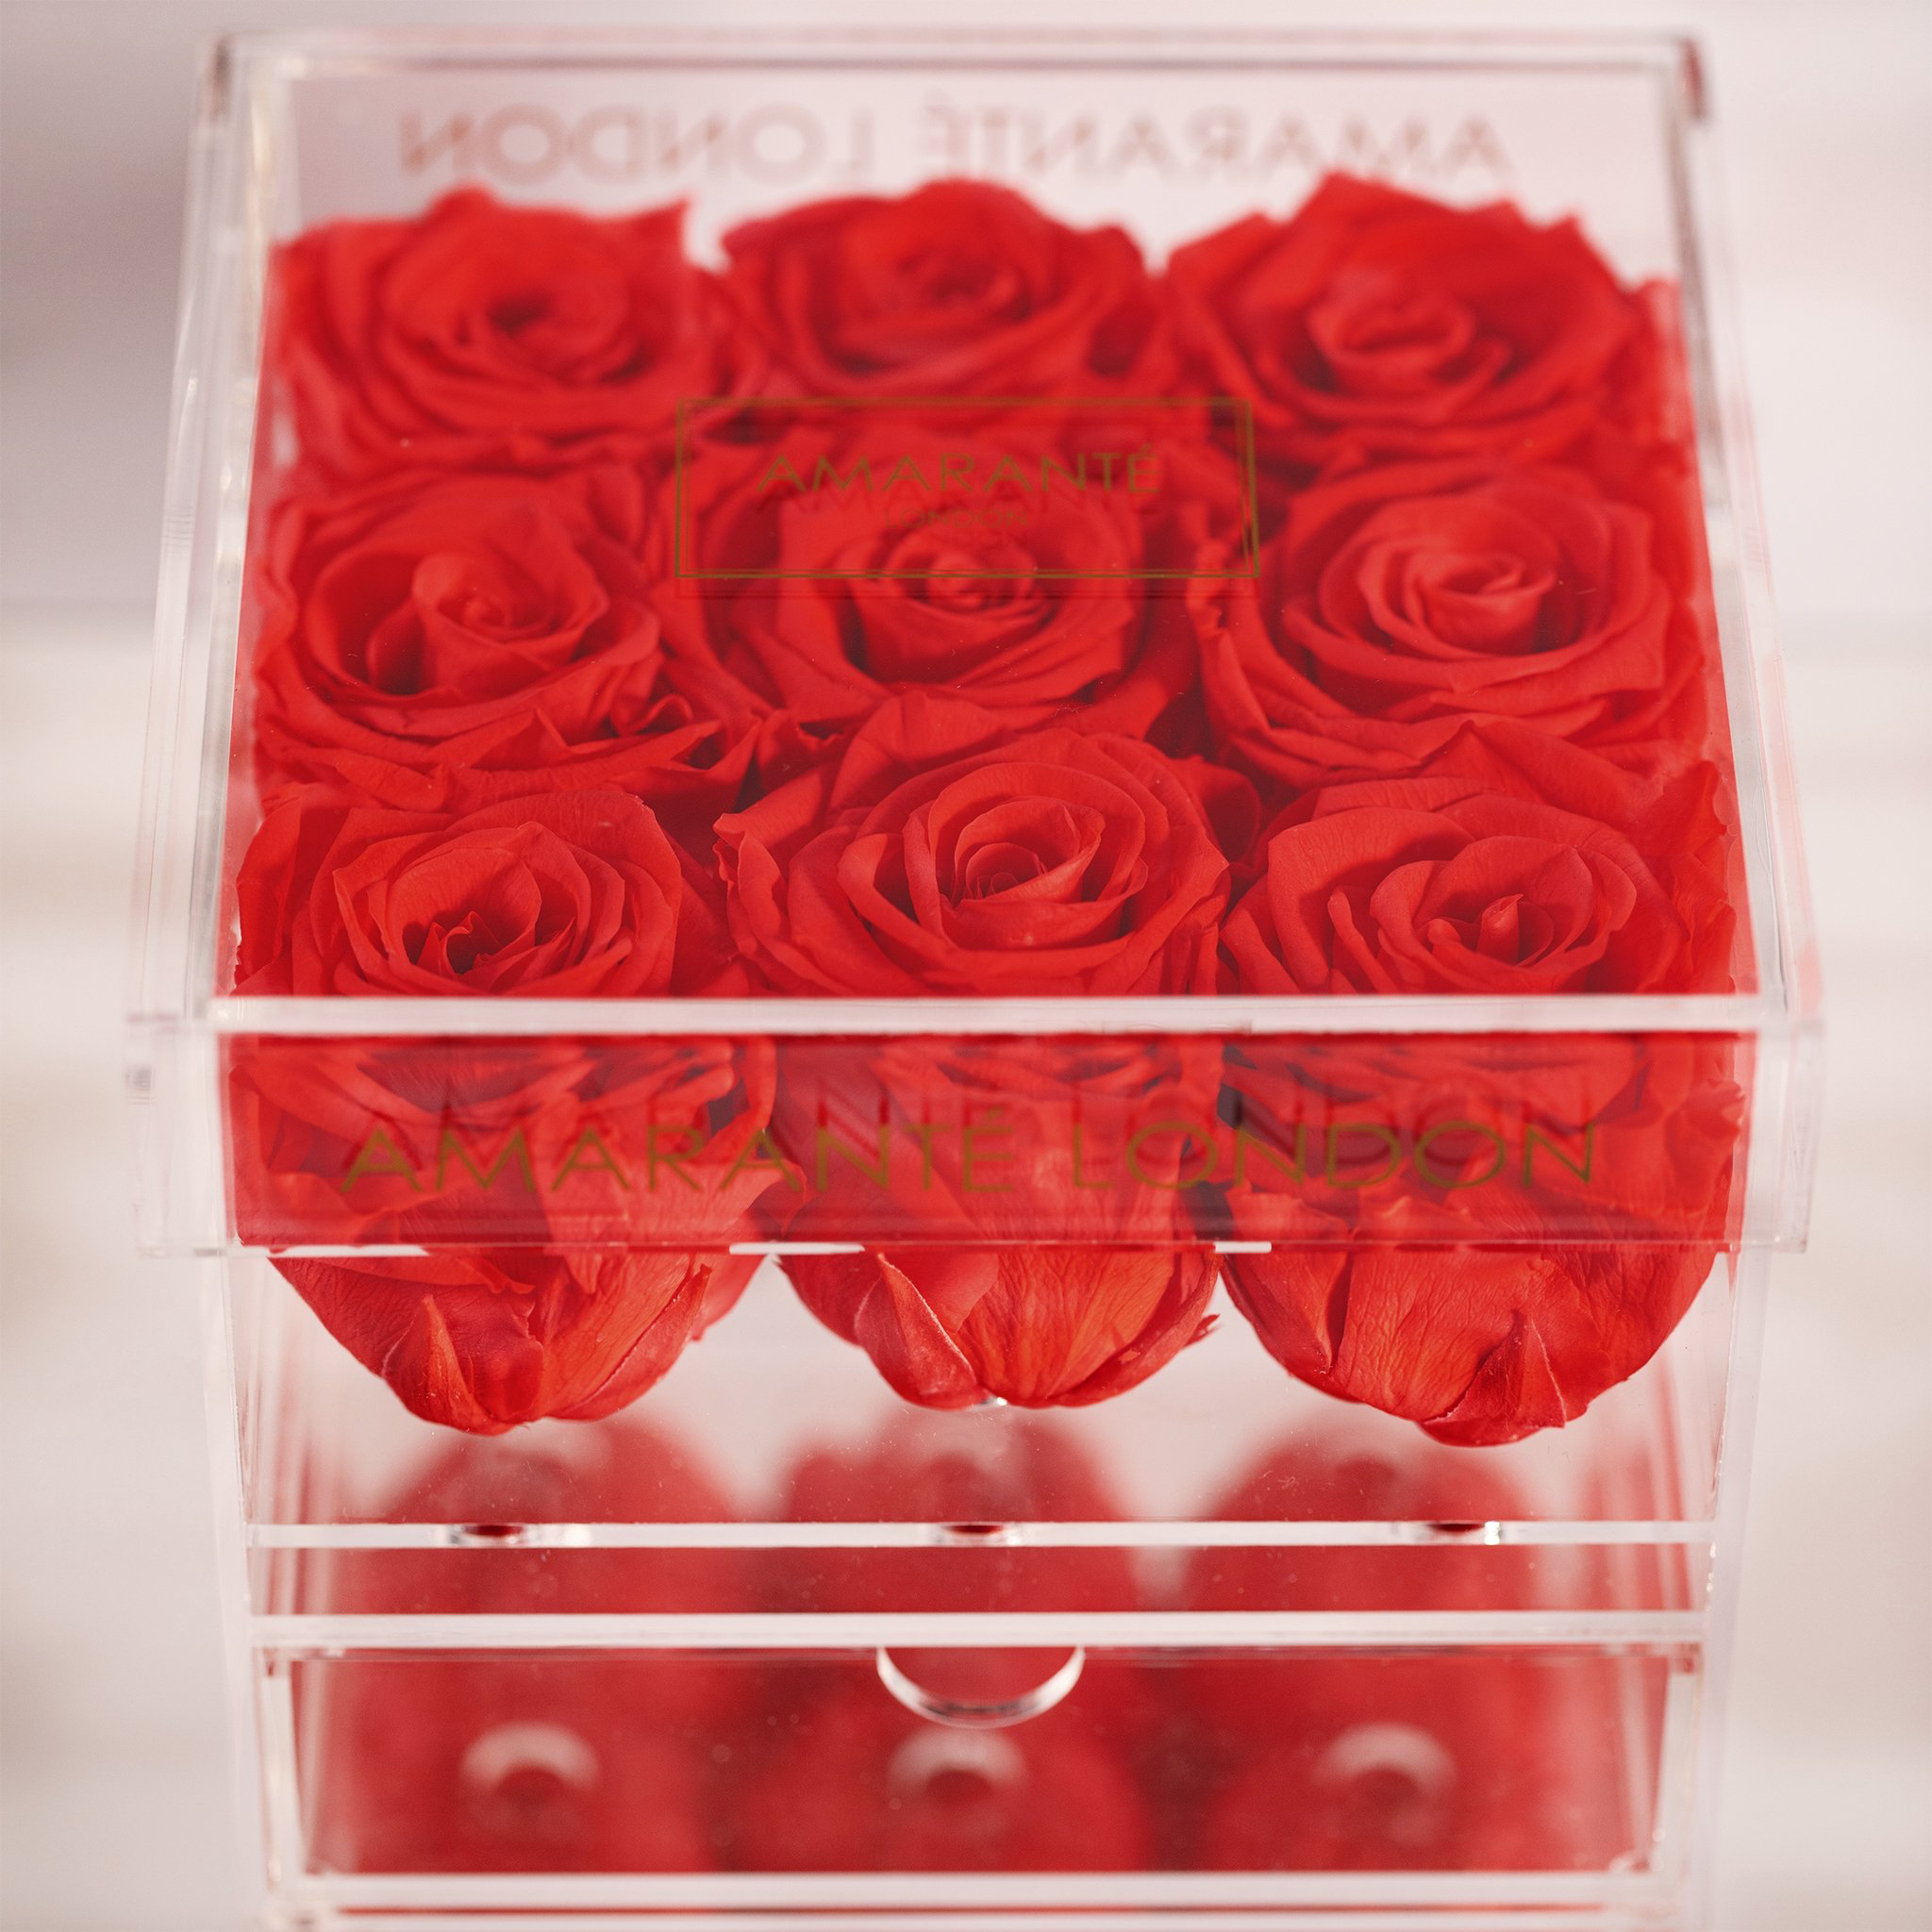 Expressive hot pink Roses encompassed in gorgeous acrylic box 